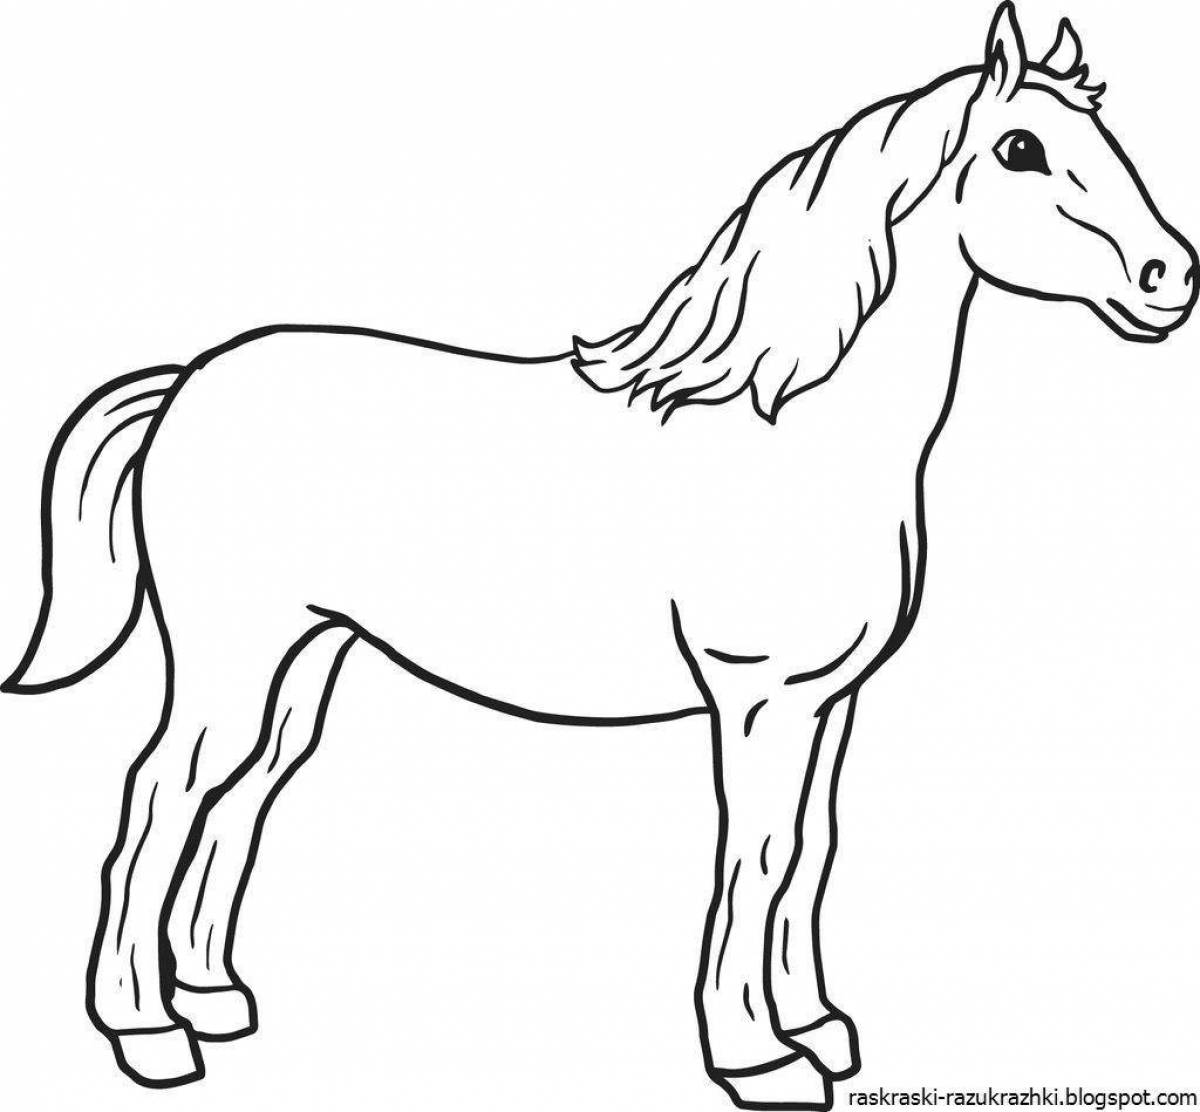 Amazing horse coloring book for kids 5-6 years old